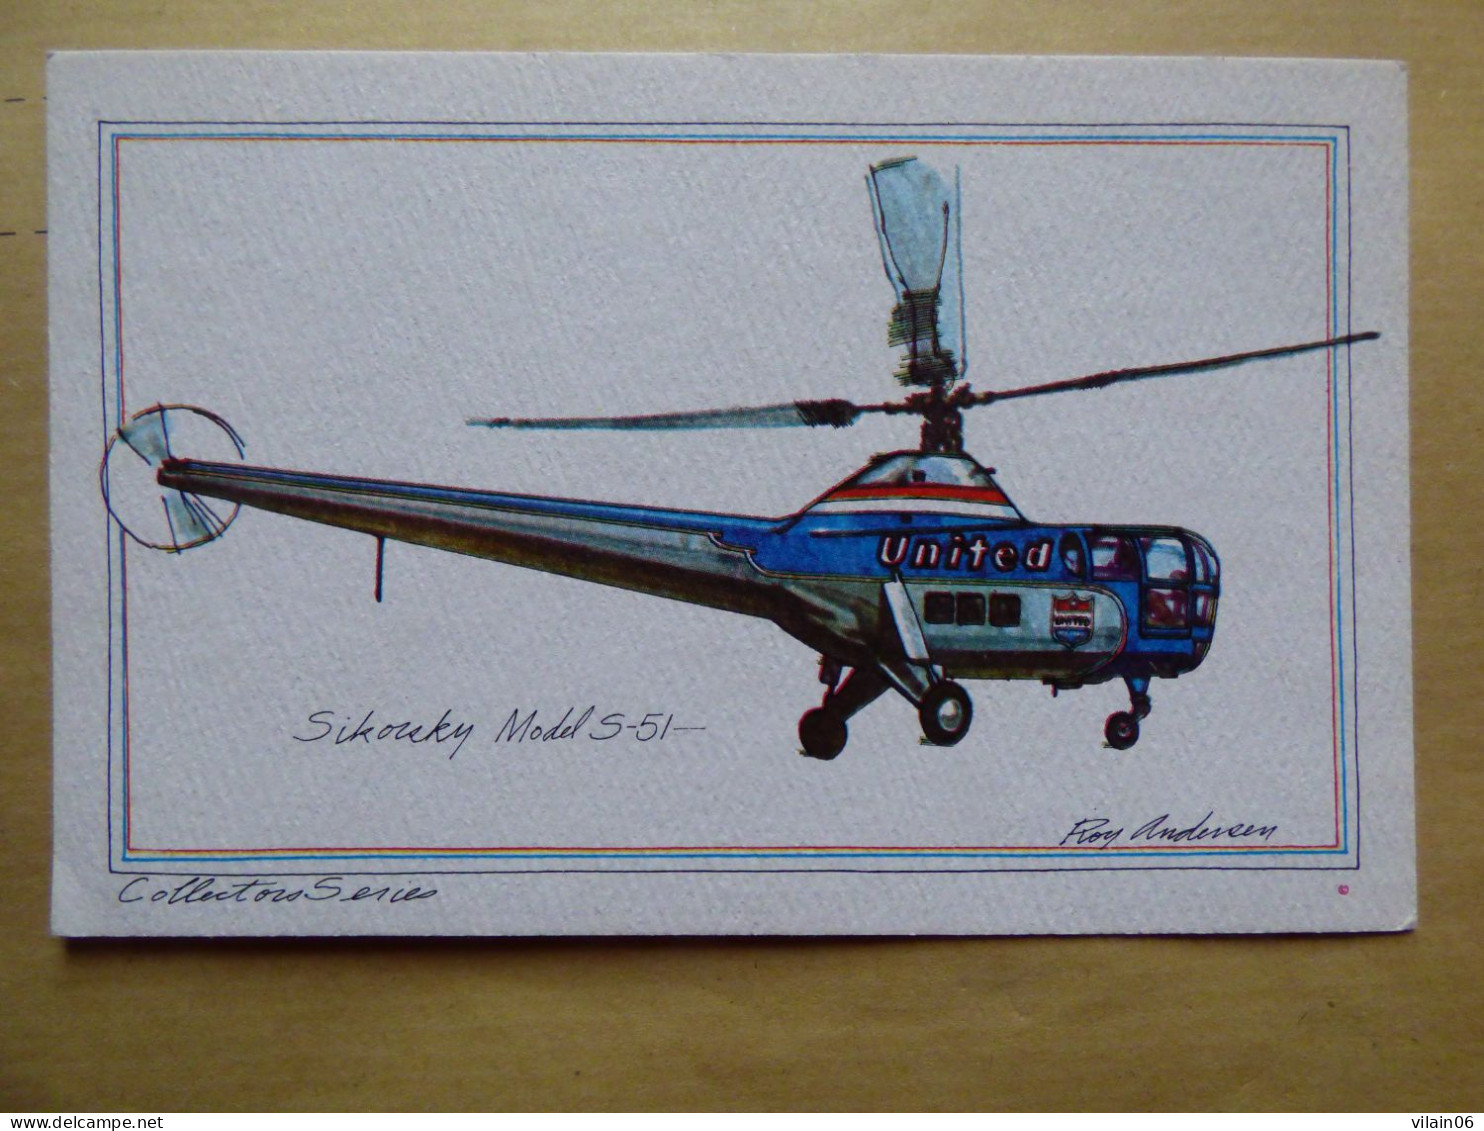 UNITED  SIKORSKY S-51  AIRLINES ISSUE / CARTE DE COMPAGNIE - Hubschrauber